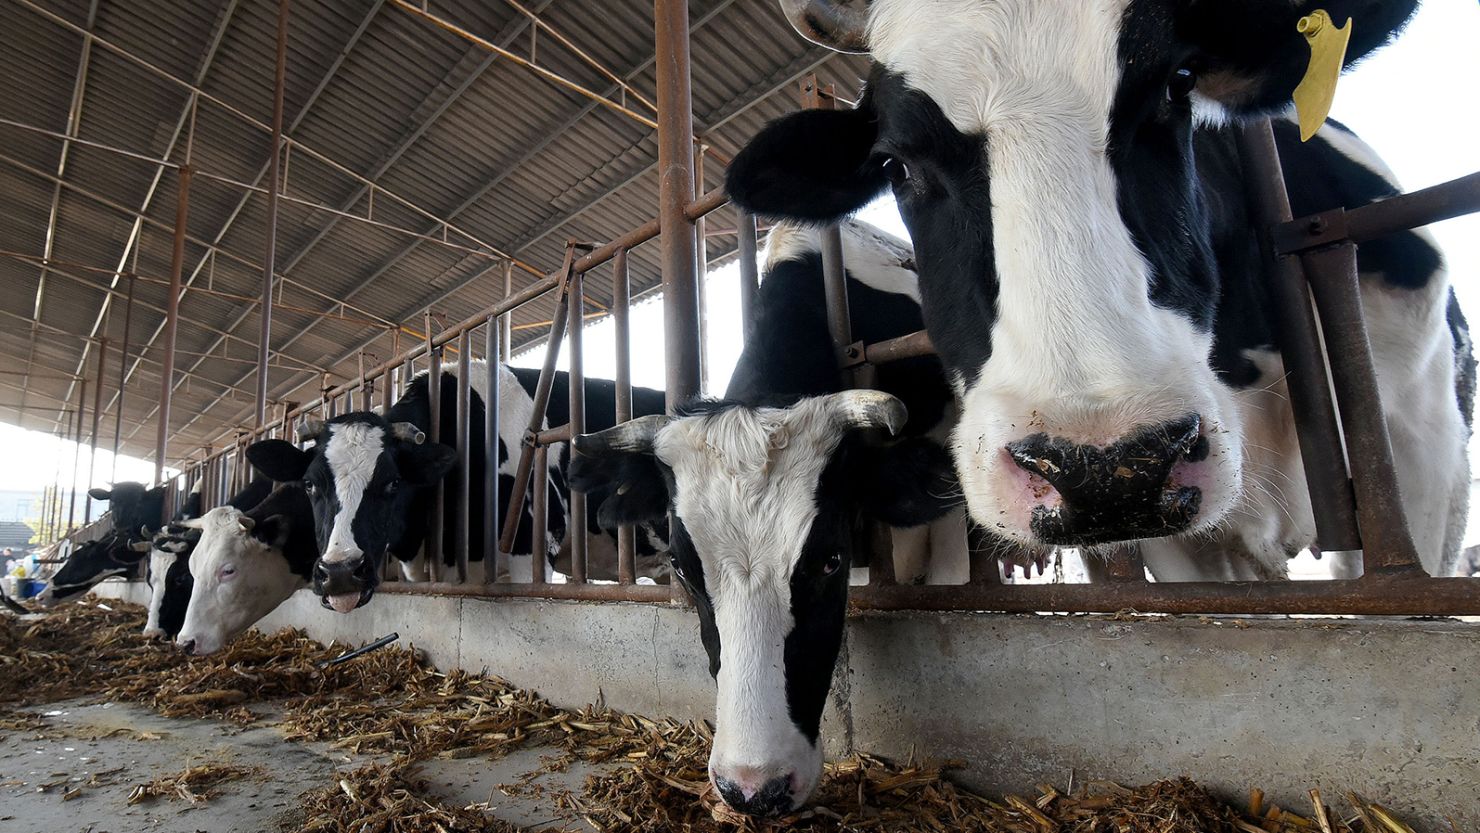 Workers feed cows at a dairy farm in Handan, Hebei province, China, on November 15, 2021.